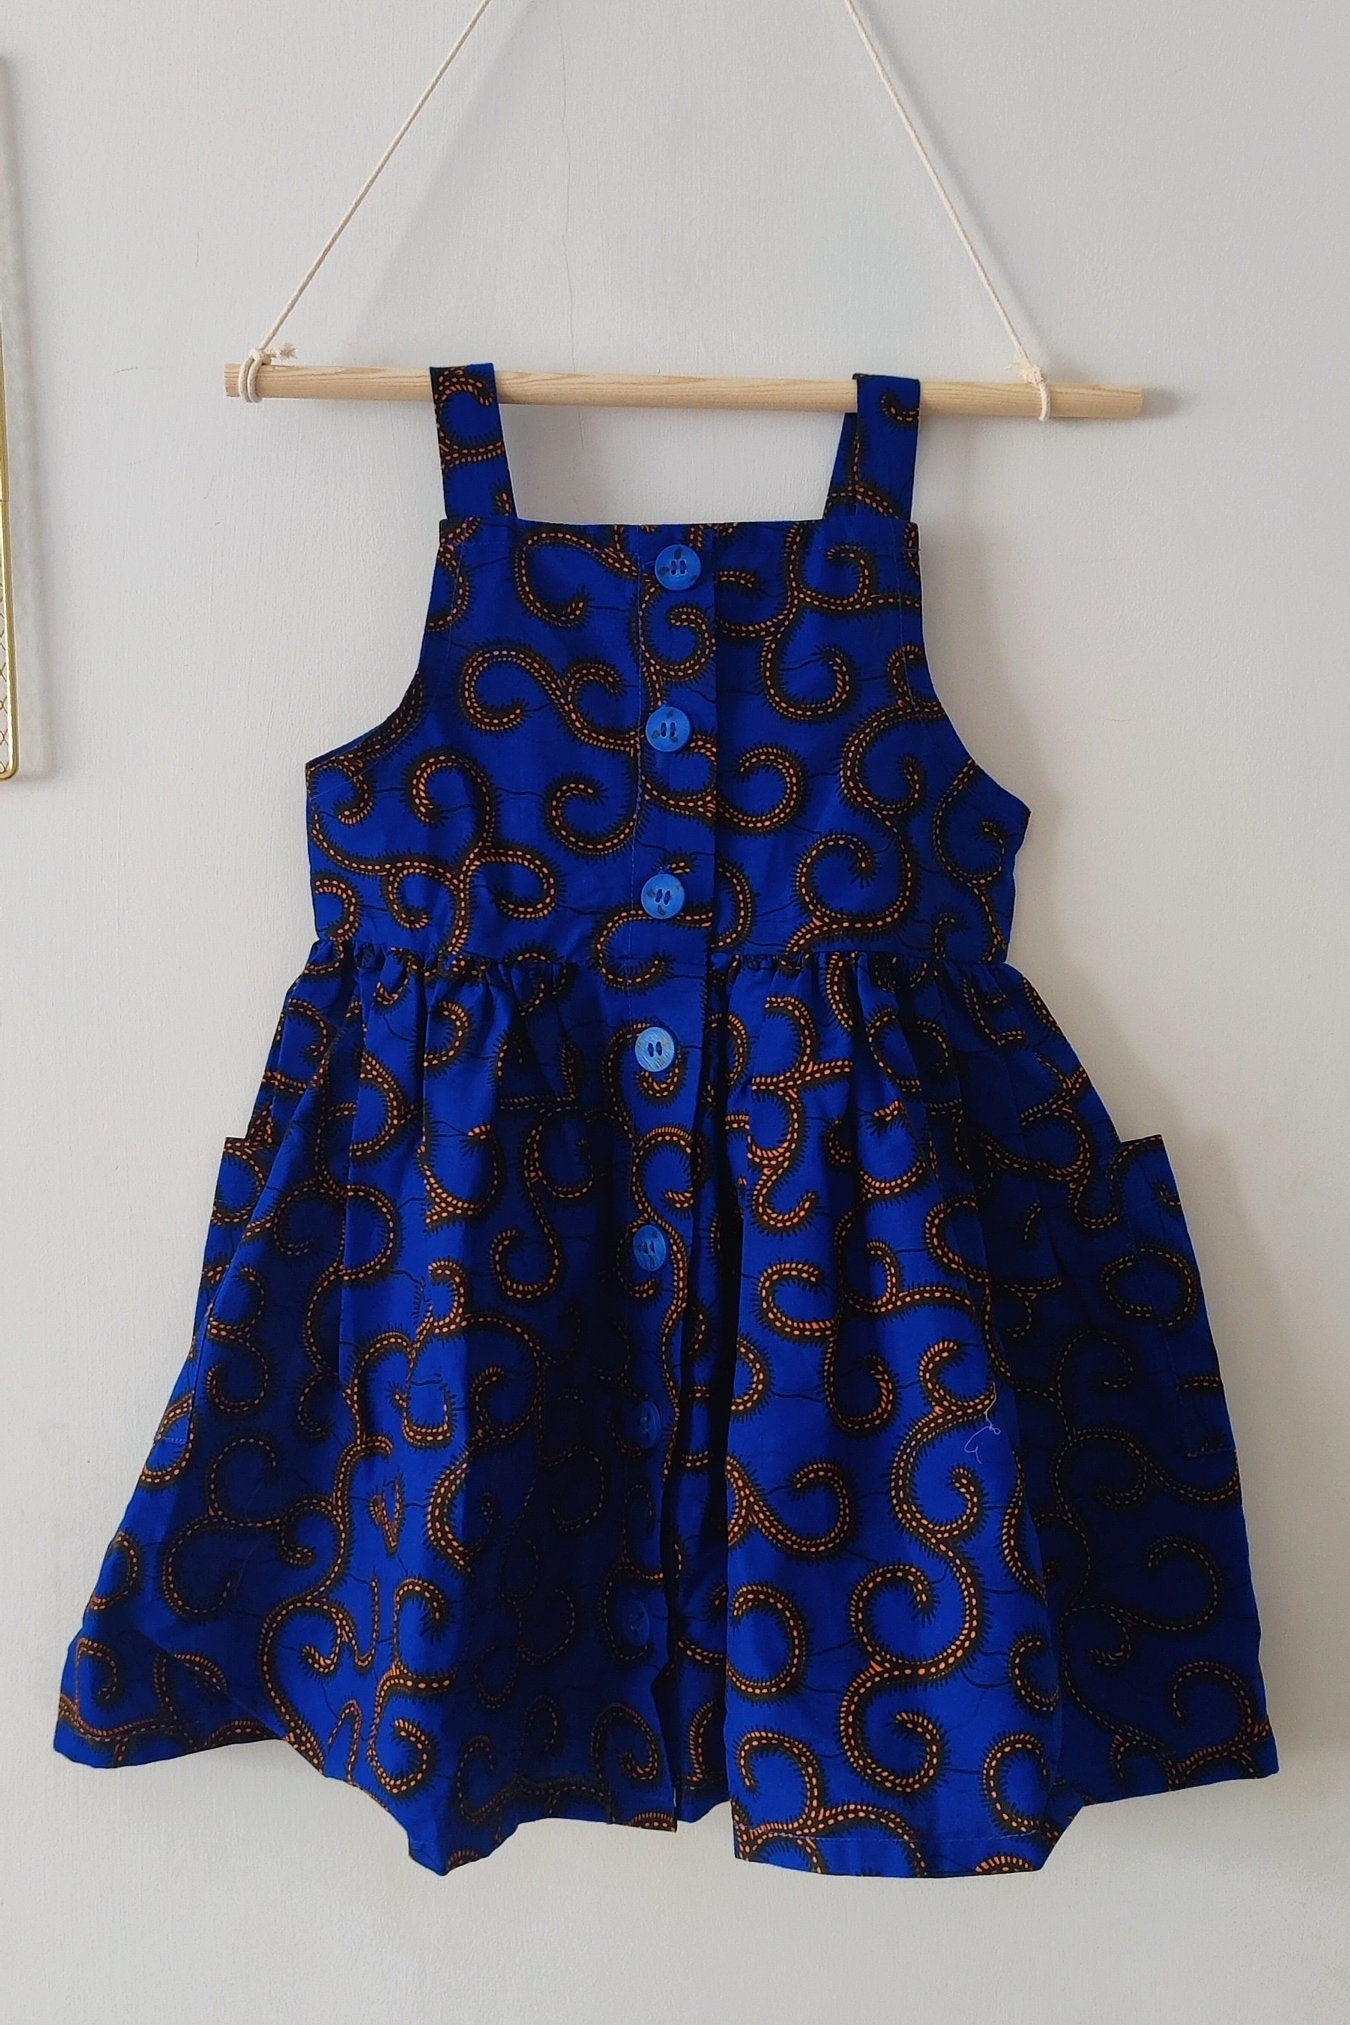 Copy of 3 and 4 year old Toddler Dress Pinafore African Print Dress/ Blue